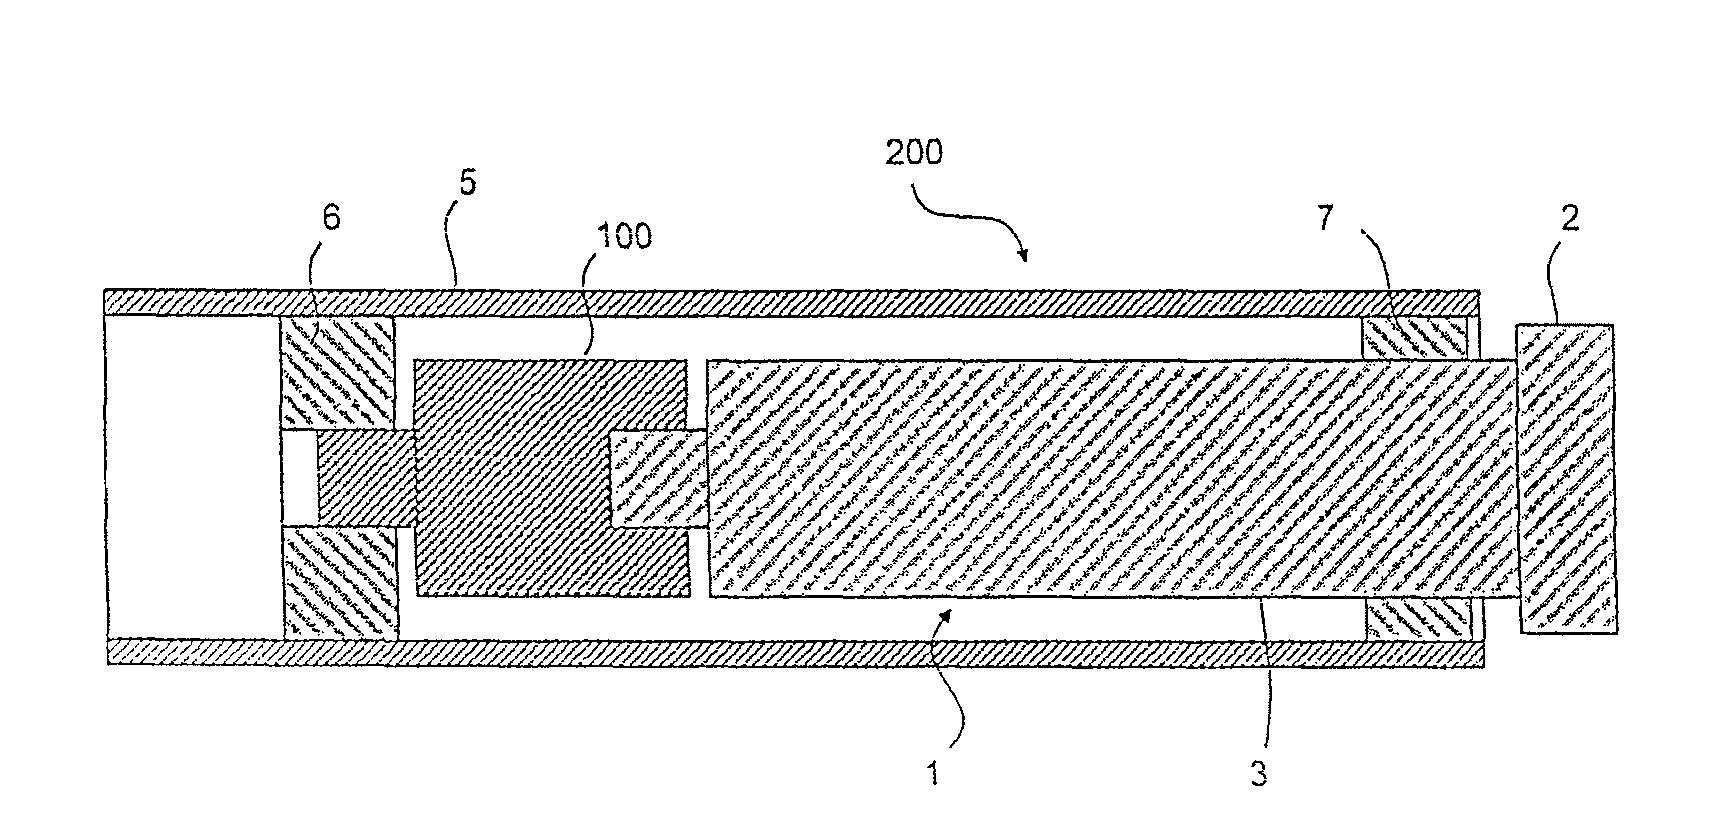 Viscoelastic transmission device for a roller shutter actuator